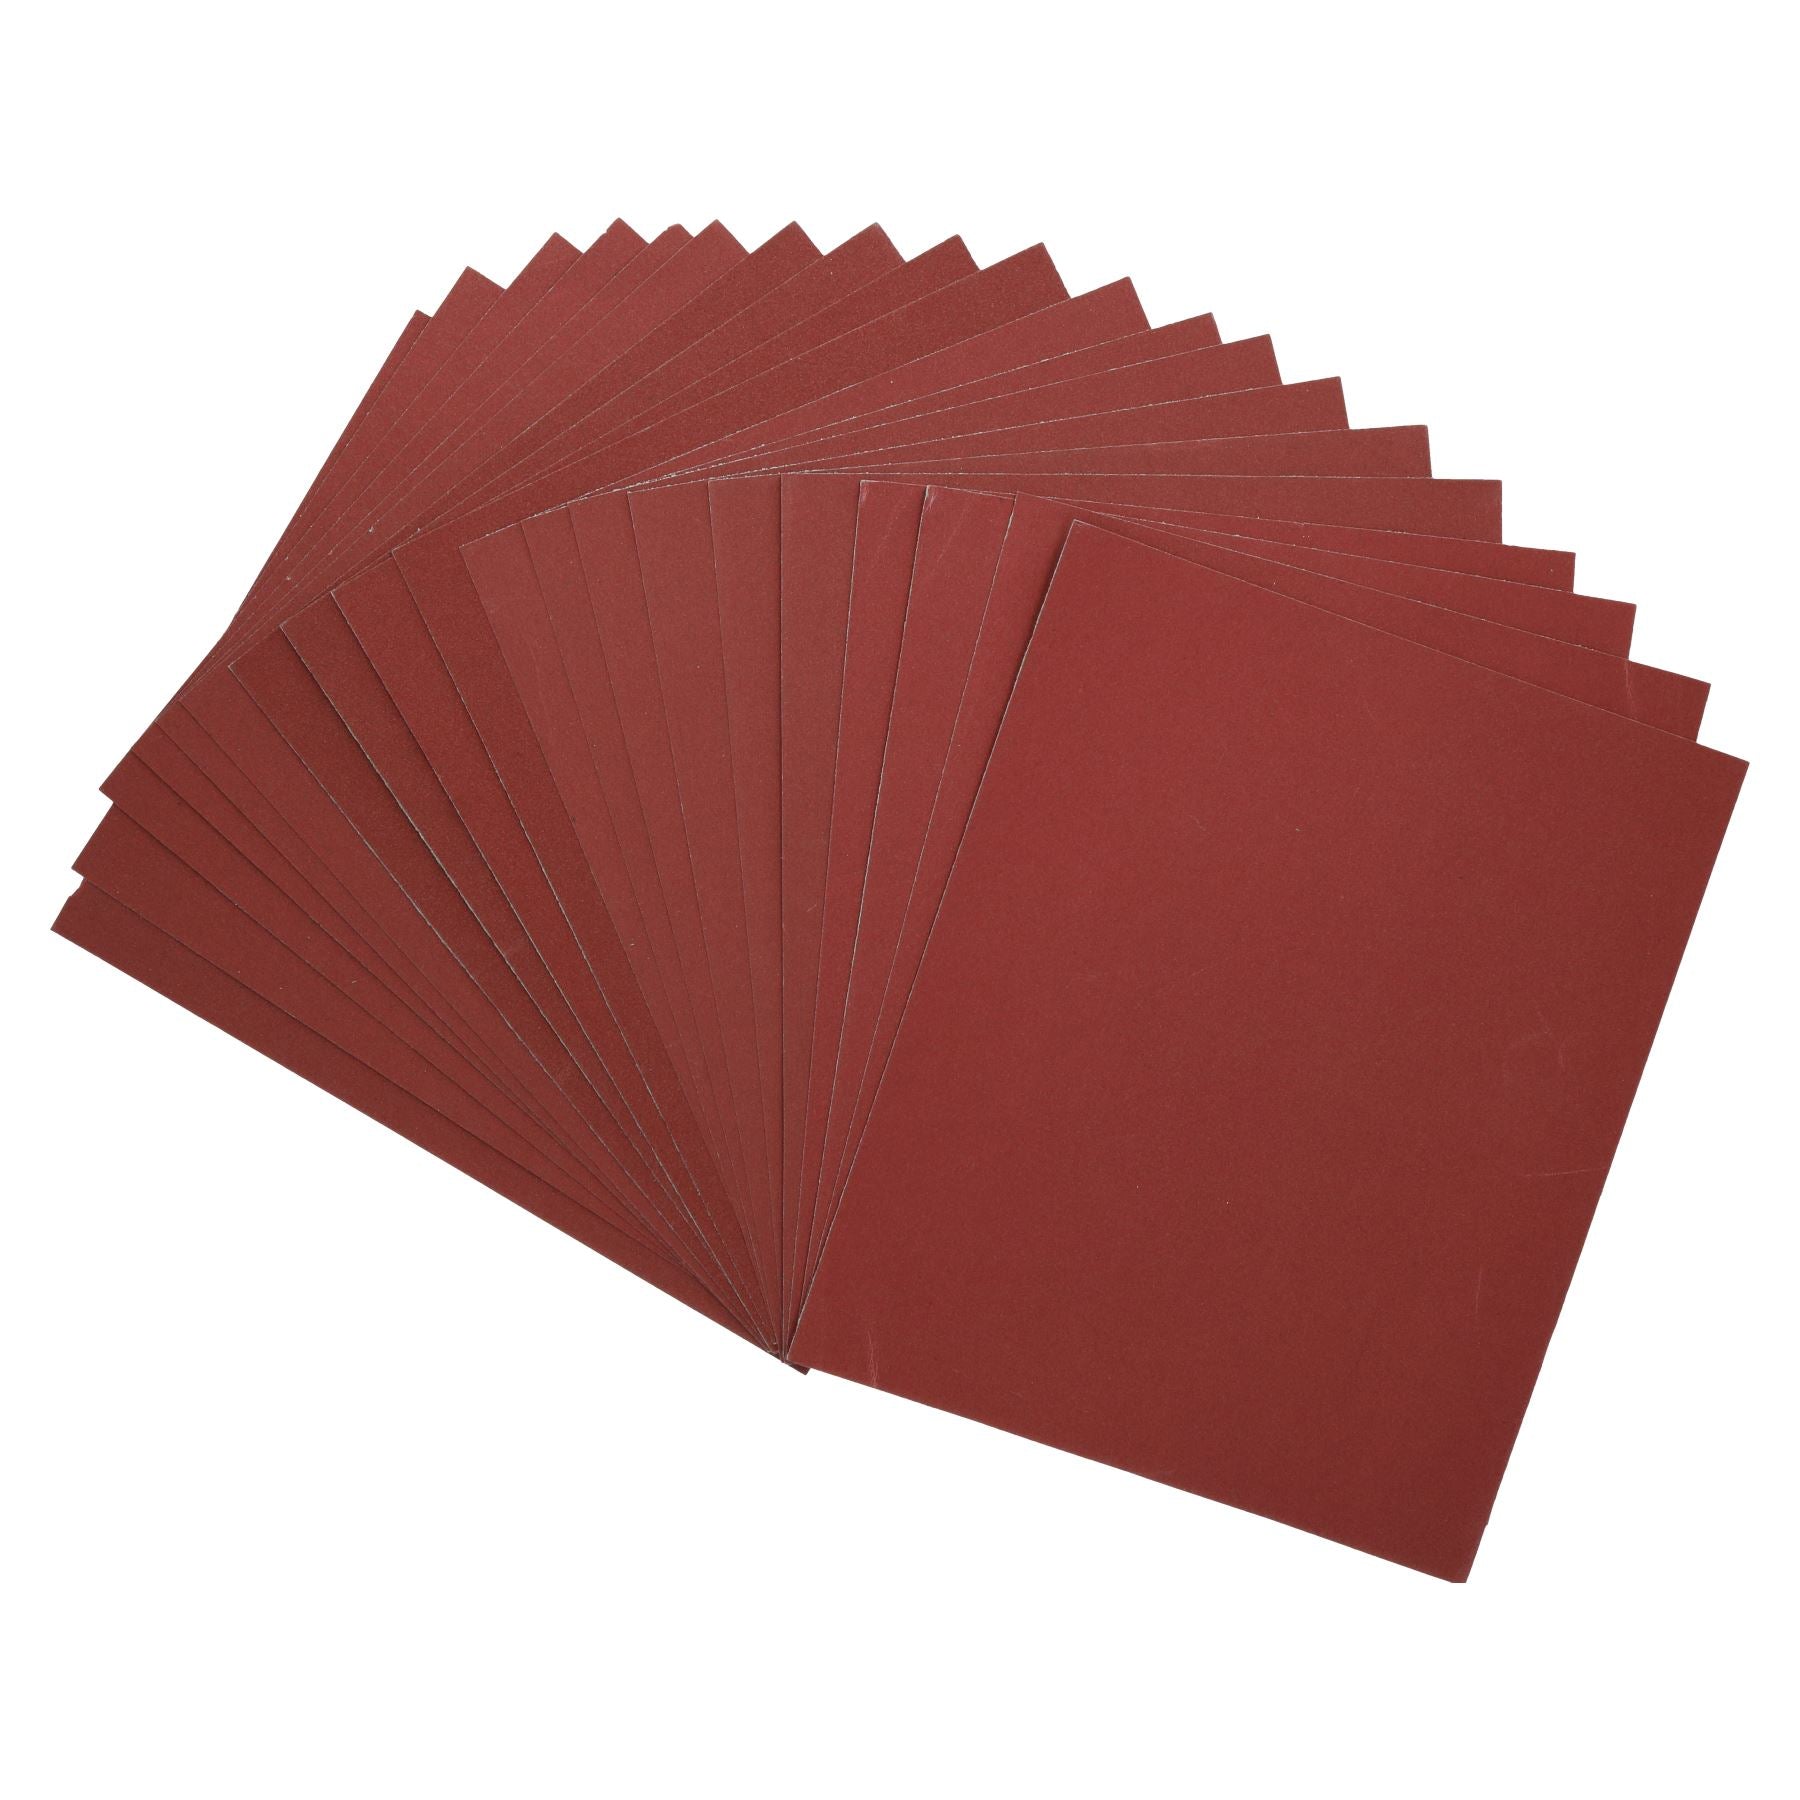 20pc Assorted Wet And Dry Sandpaper Sheets For Metal Plastic Wood Mixed Grit